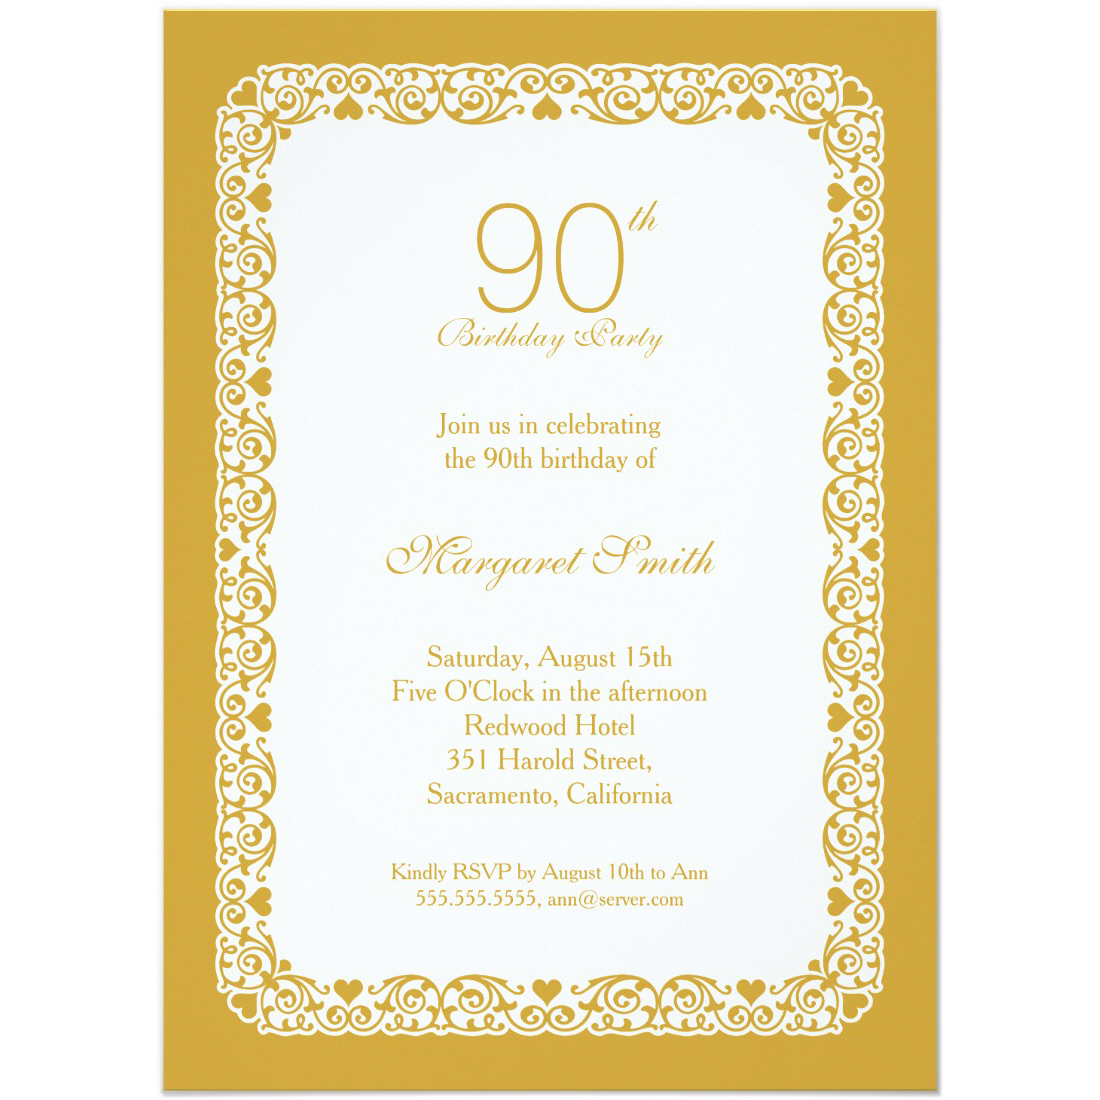 90th-birthday-party-invitations-templates-business-template-ideas